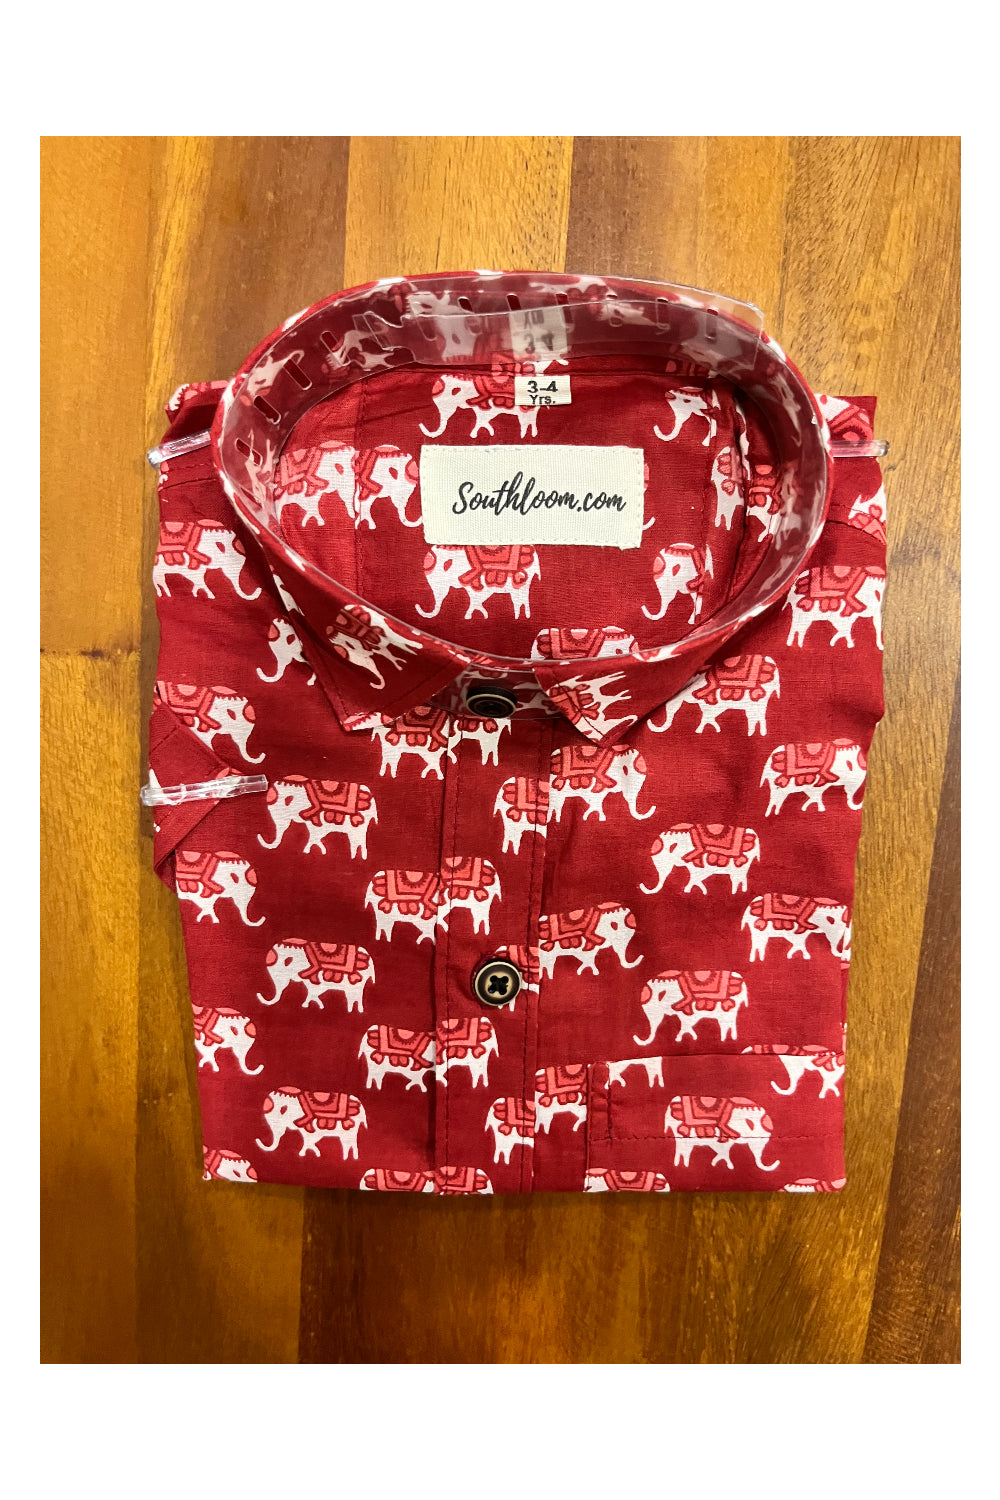 Southloom Jaipur Cotton Red Elephant Hand Block Printed Shirt For Kids (Half Sleeves)